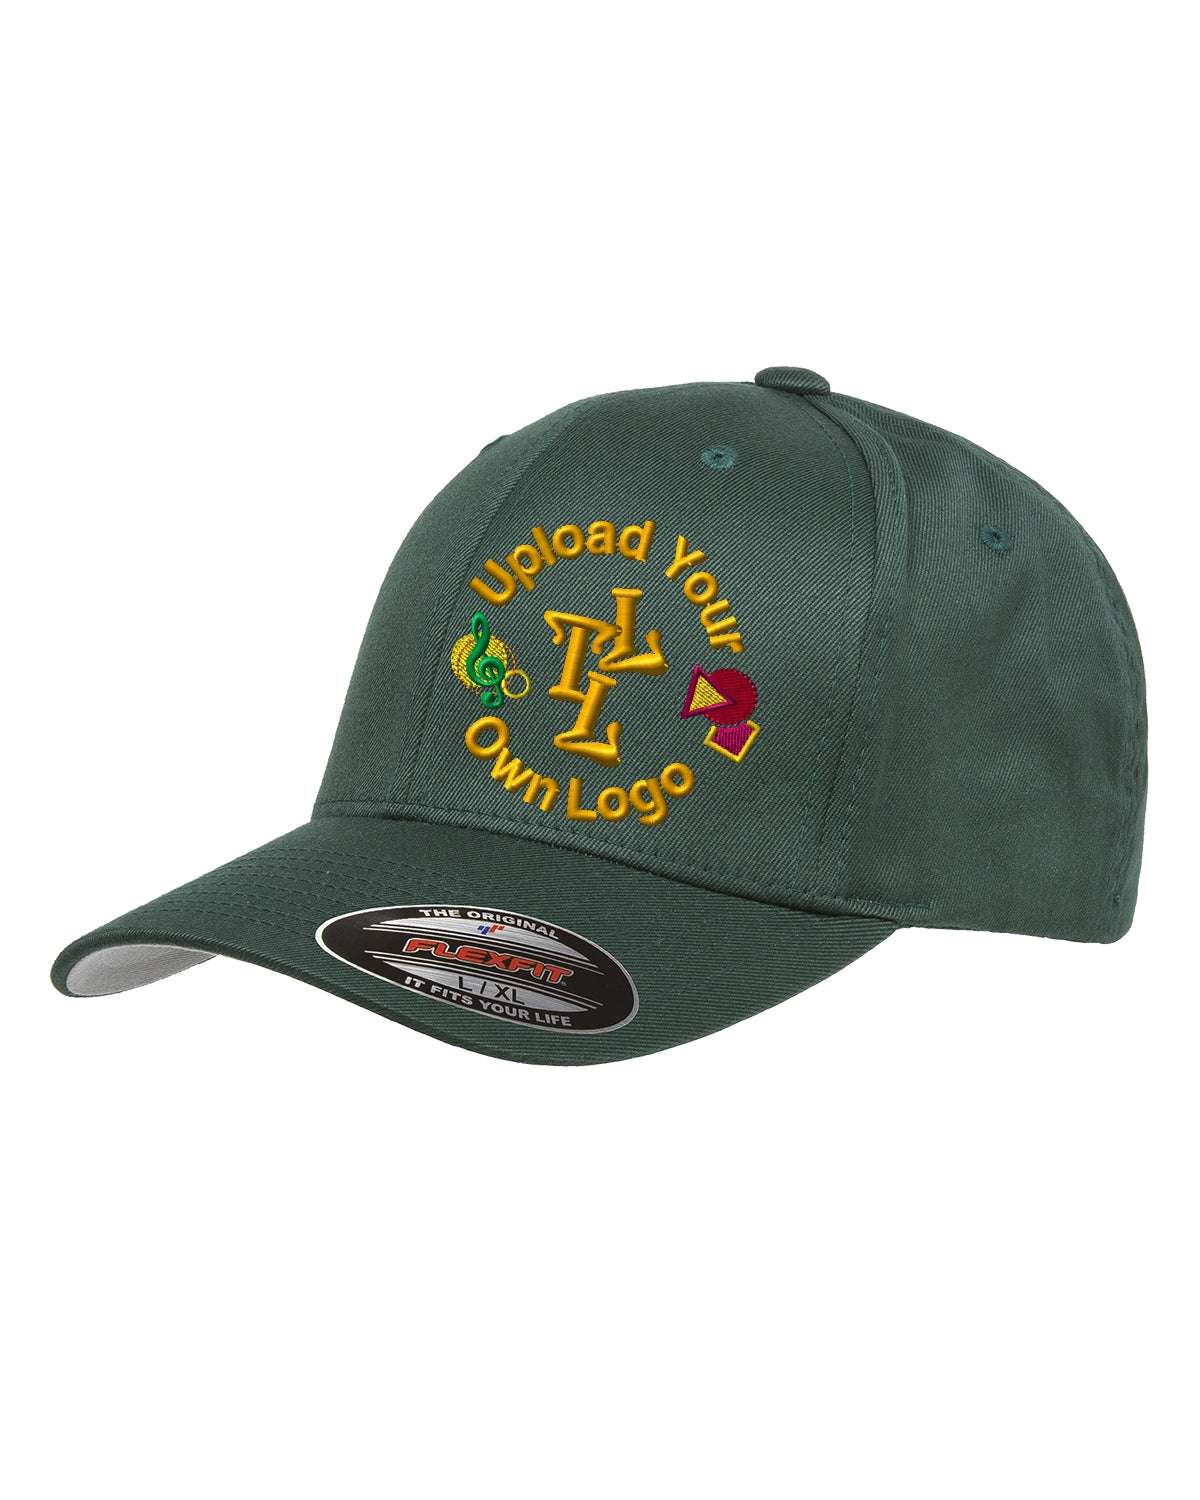 Flex Fitted Ball Cap with Your Company Logo Embroidered - green